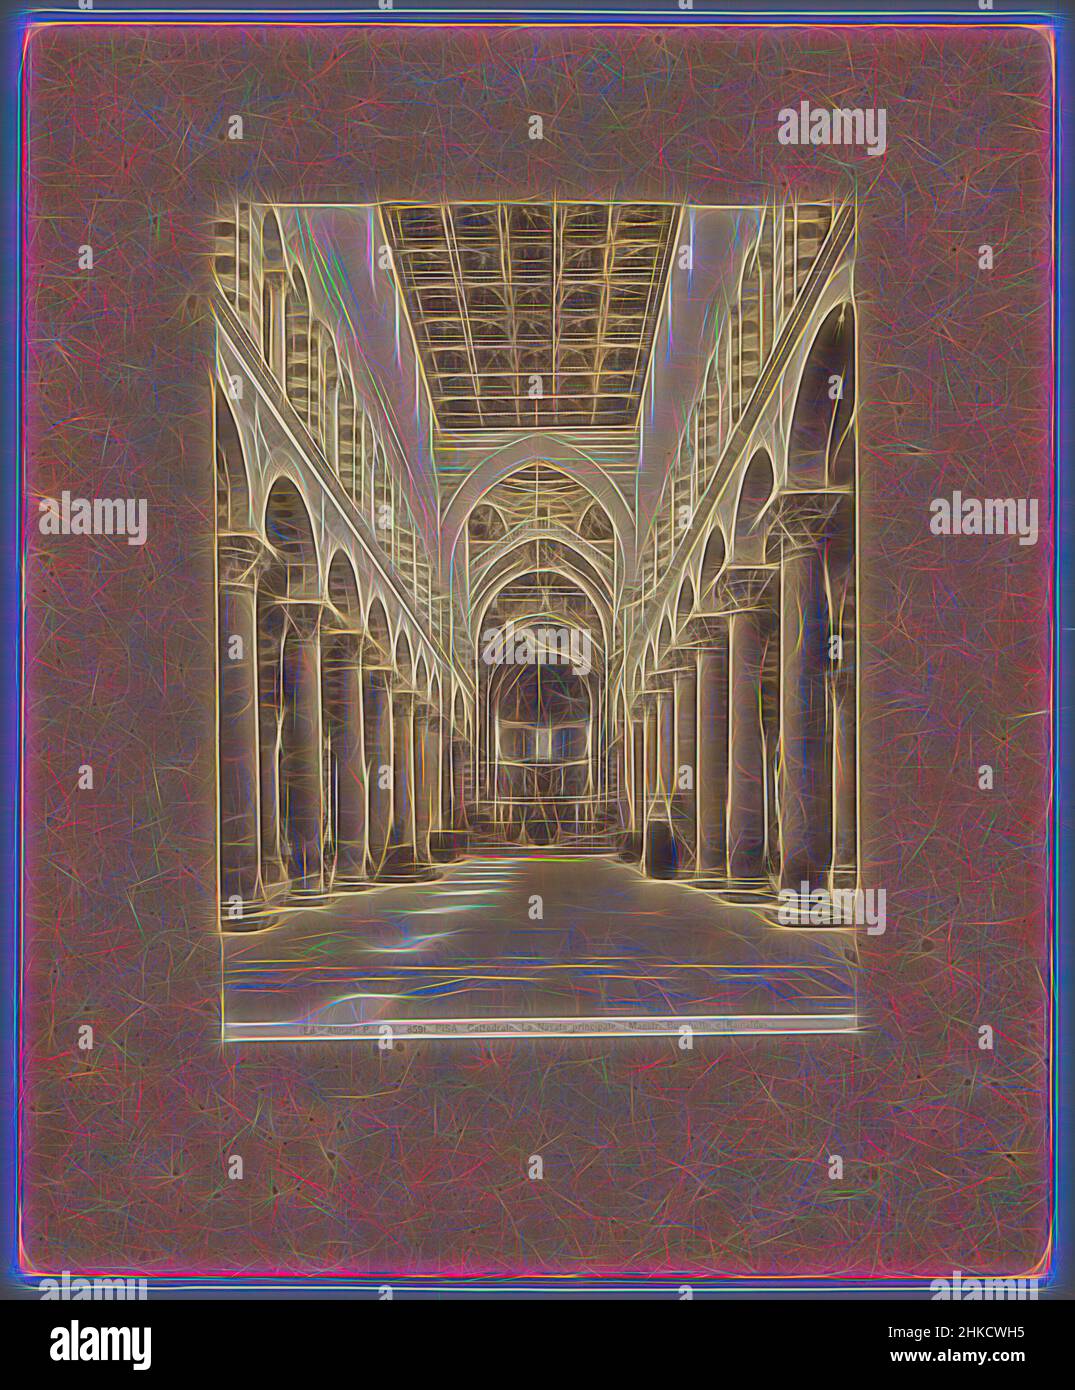 Inspired by Interior of the Cathedral of Pisa, with view of the choir, PISA - Cattedrale. La Navata principale., Alinari, Dom, c. 1875 - c. 1900, albumen print, height 249 mm × width 189 mm, Reimagined by Artotop. Classic art reinvented with a modern twist. Design of warm cheerful glowing of brightness and light ray radiance. Photography inspired by surrealism and futurism, embracing dynamic energy of modern technology, movement, speed and revolutionize culture Stock Photo